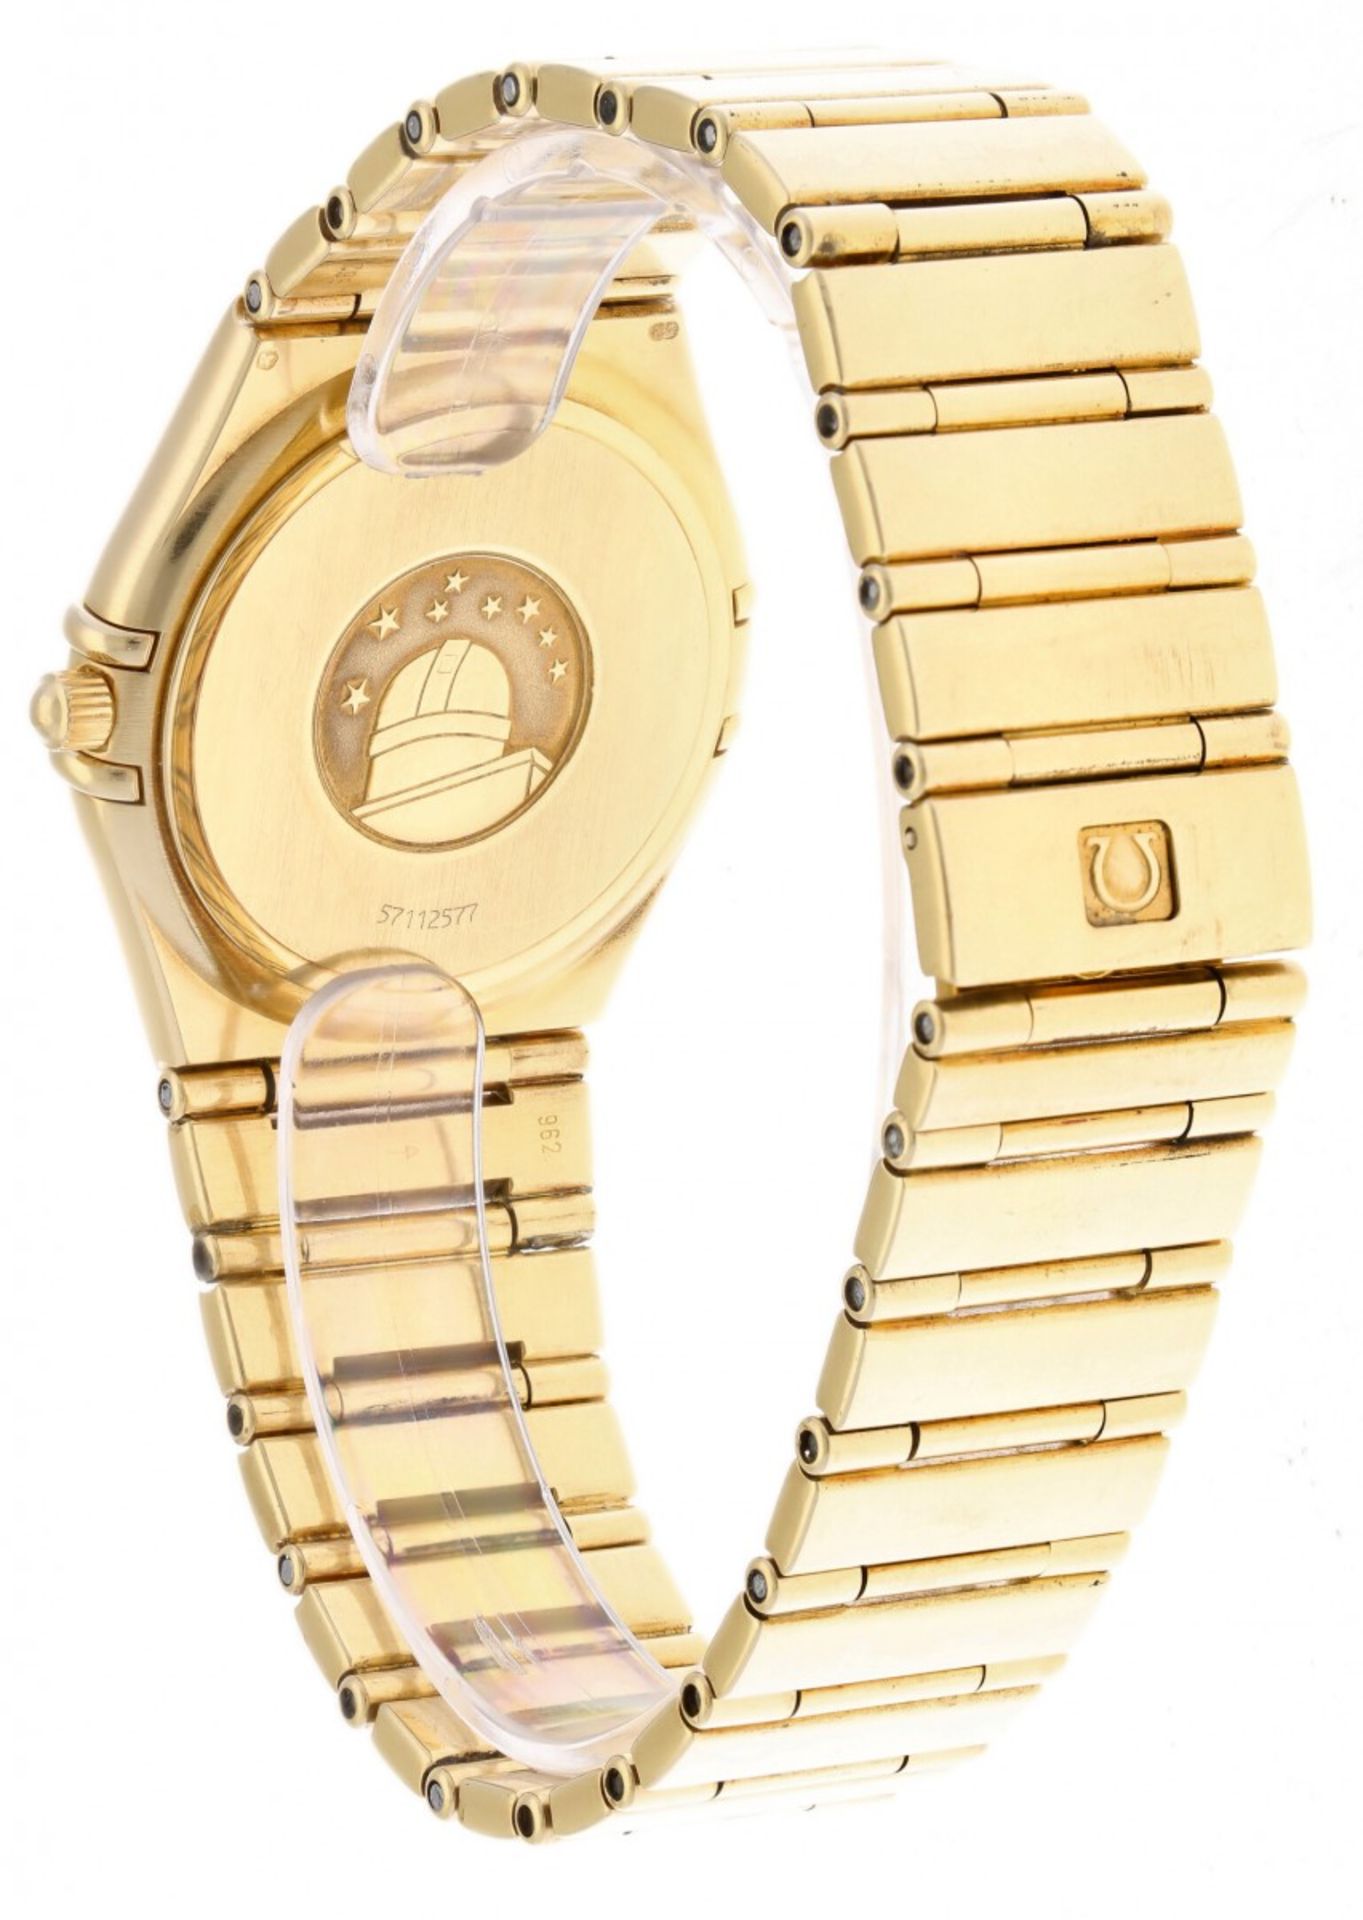 Omega Constellation 3961201 -Men's watch - ca. 1998 - Image 3 of 5